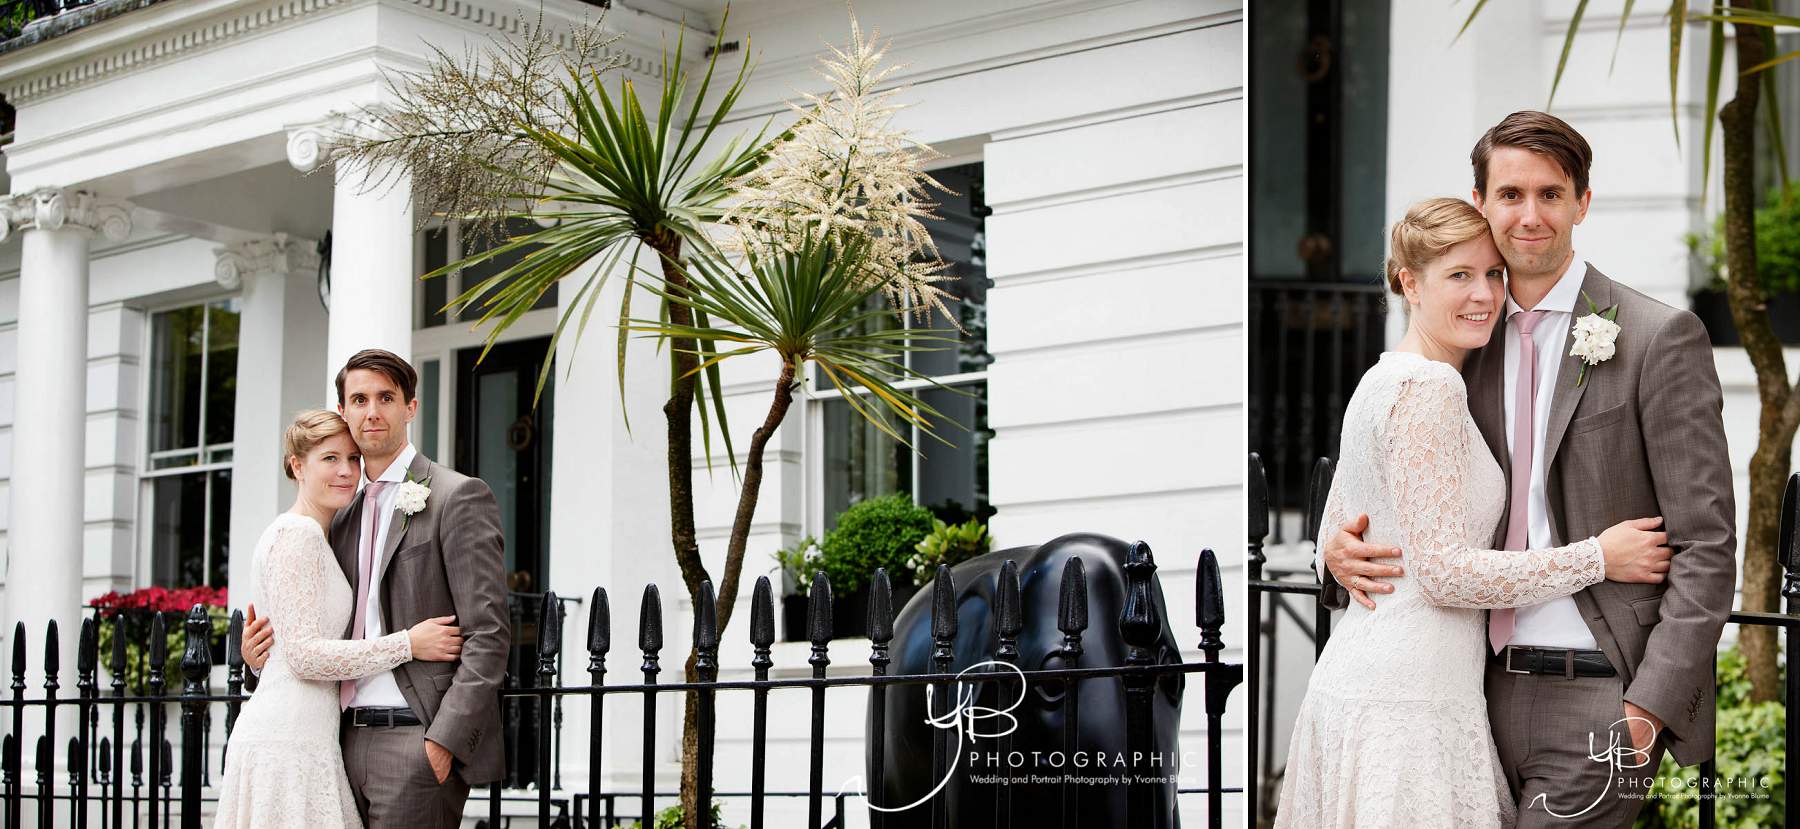 Wedding Portraits in Kensington by YBPHOTOGRAPHIC